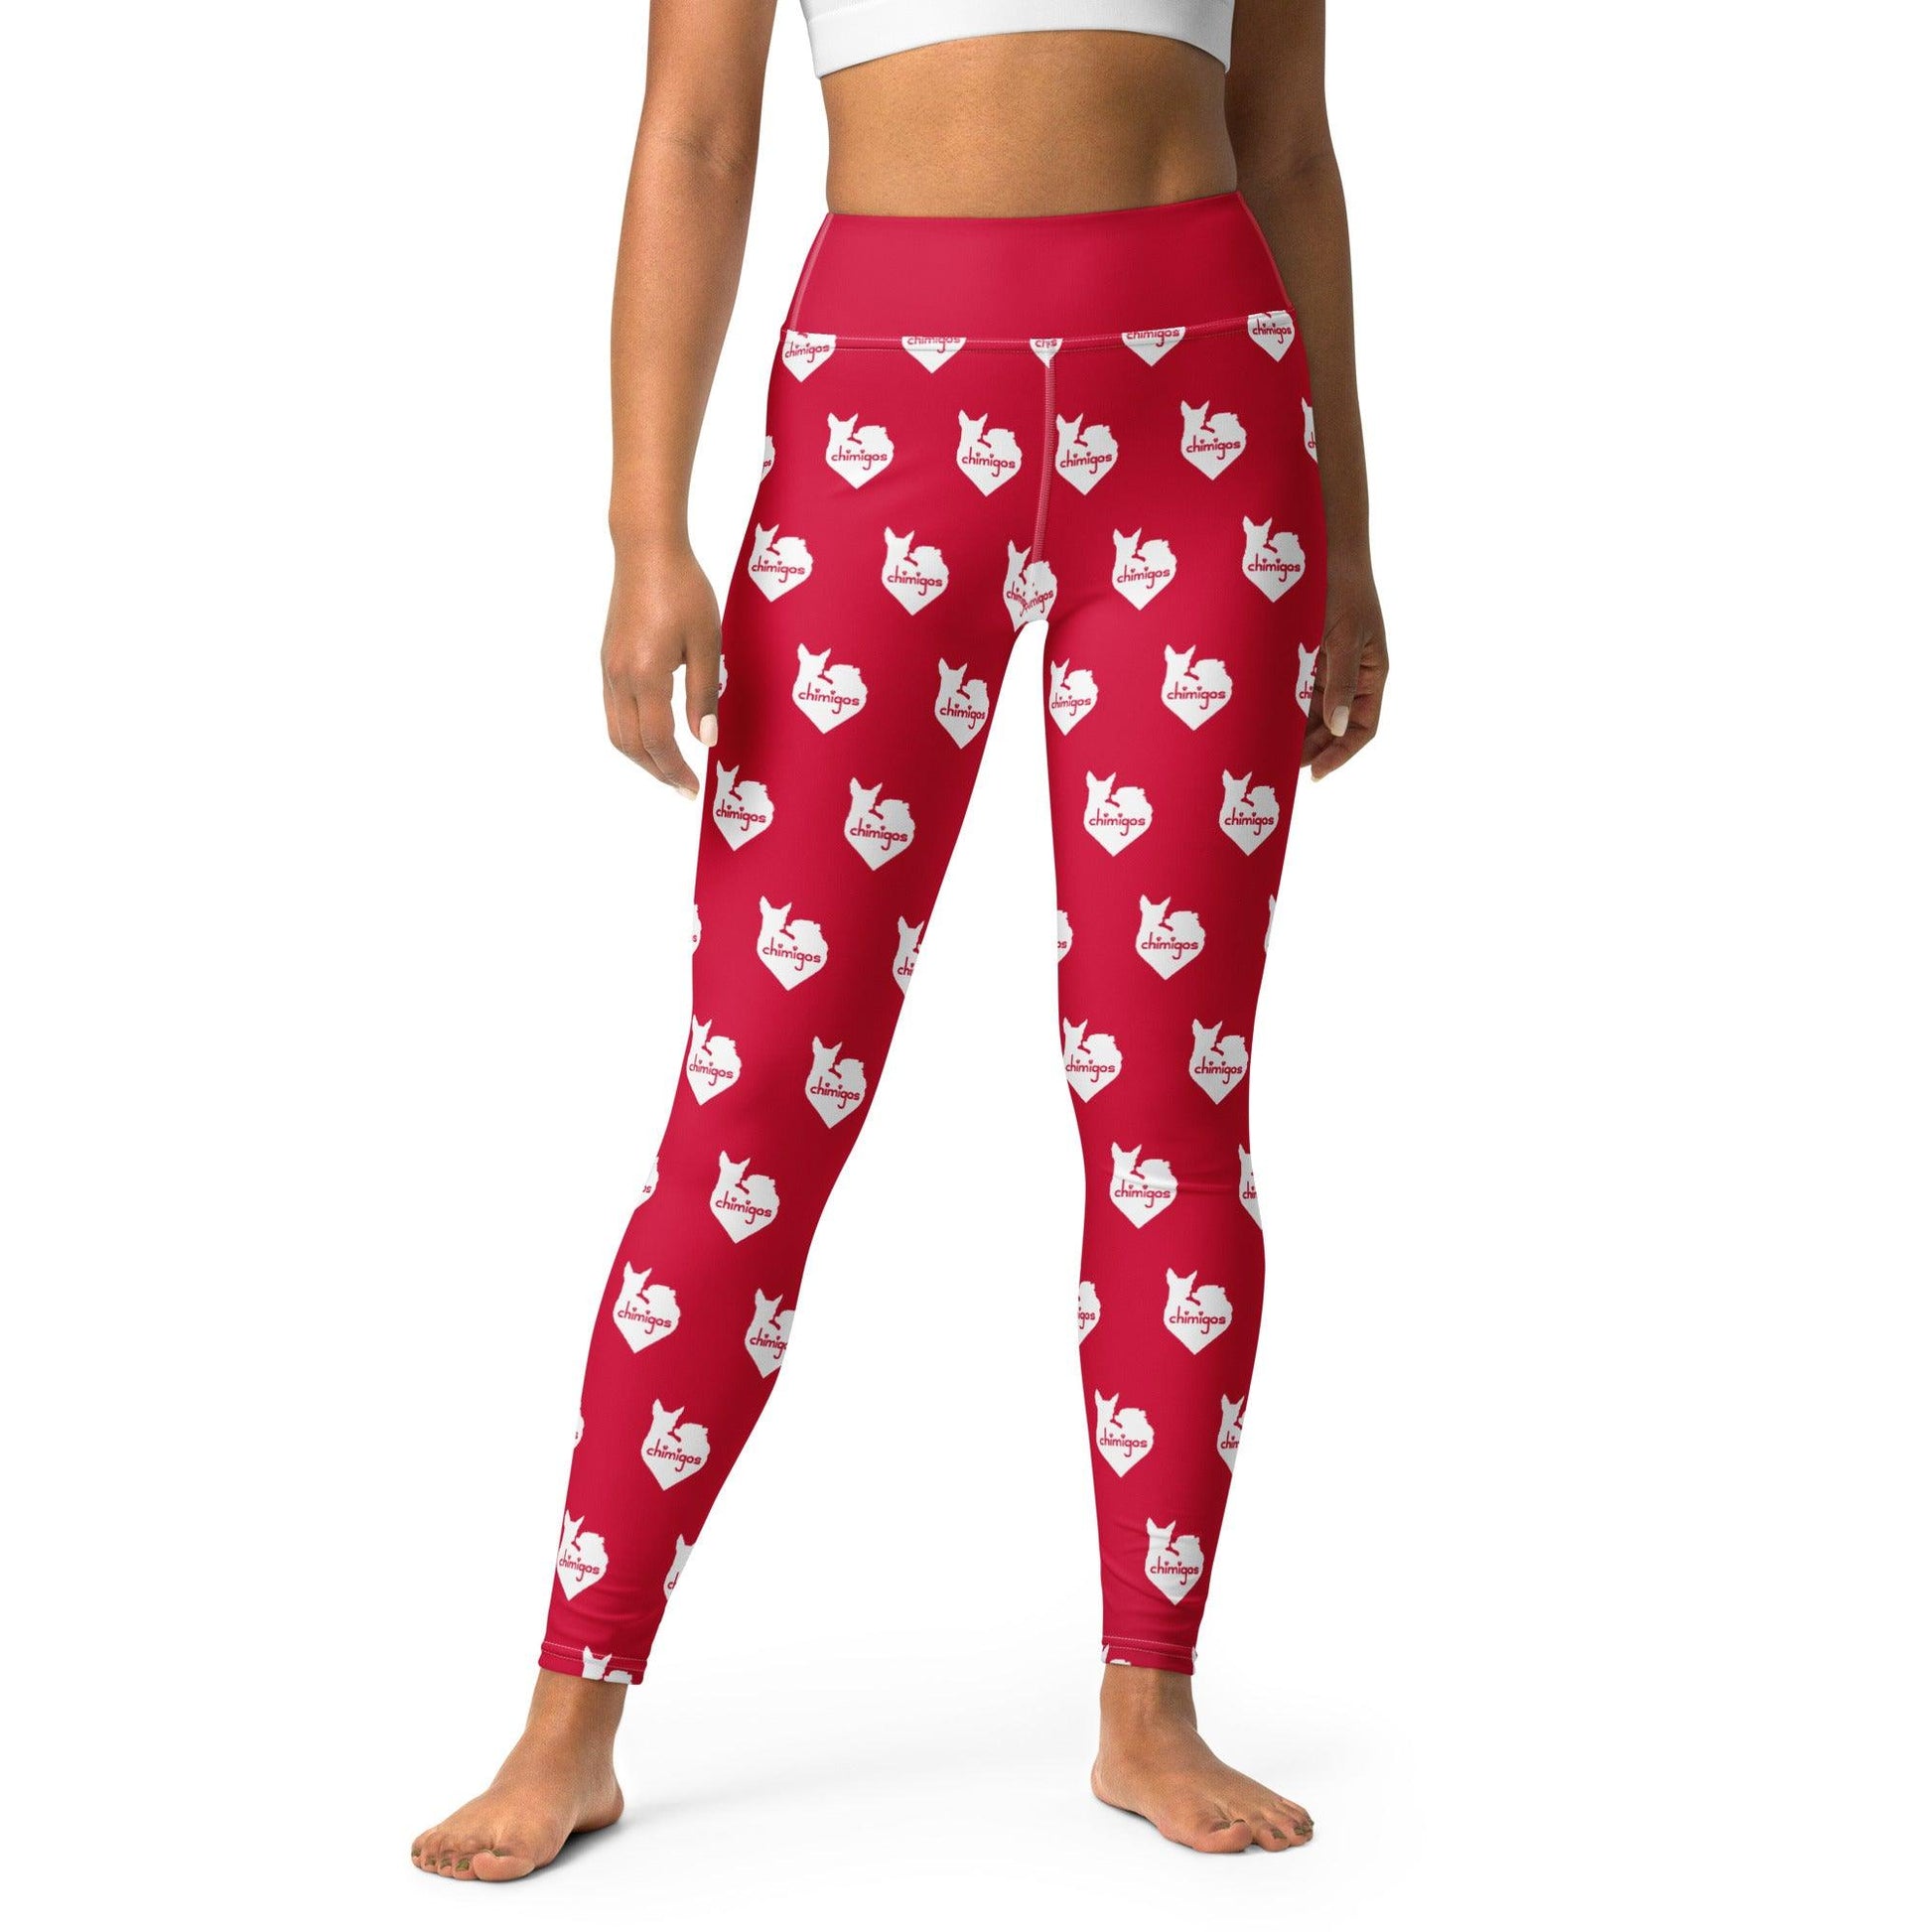 Chimigos chihuahua love heart logo print yoga leggings in cerise pink and white. Chi + Amigos = Chimigos. For the love of chihuahuas. See more at chimigos.com